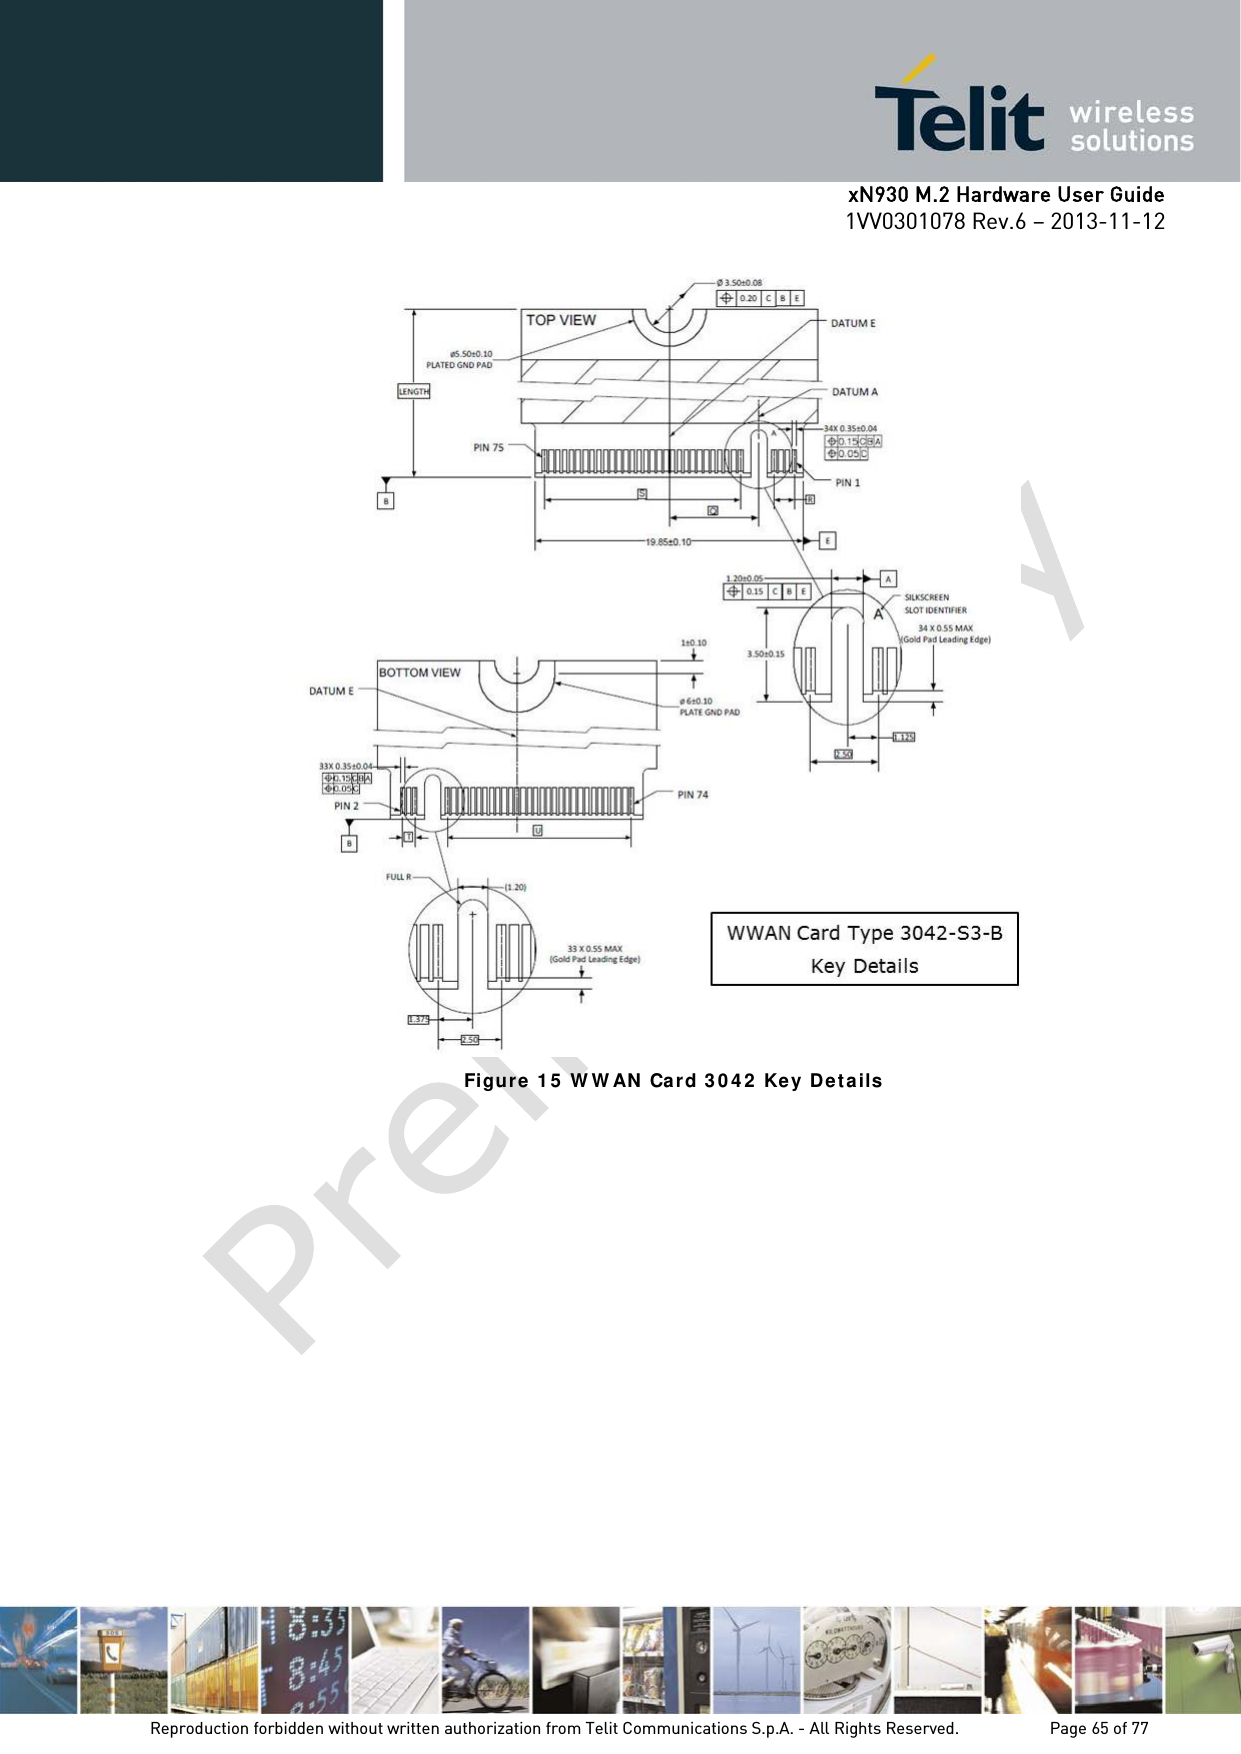      xN930 M.2 Hardware User Guide 1VV0301078 Rev.6 – 2013-11-12     Figur e 1 5  W W AN  Ca rd 3 0 4 2  Key Det ails   Reproduction forbidden without written authorization from Telit Communications S.p.A. - All Rights Reserved.    Page 65 of 77 